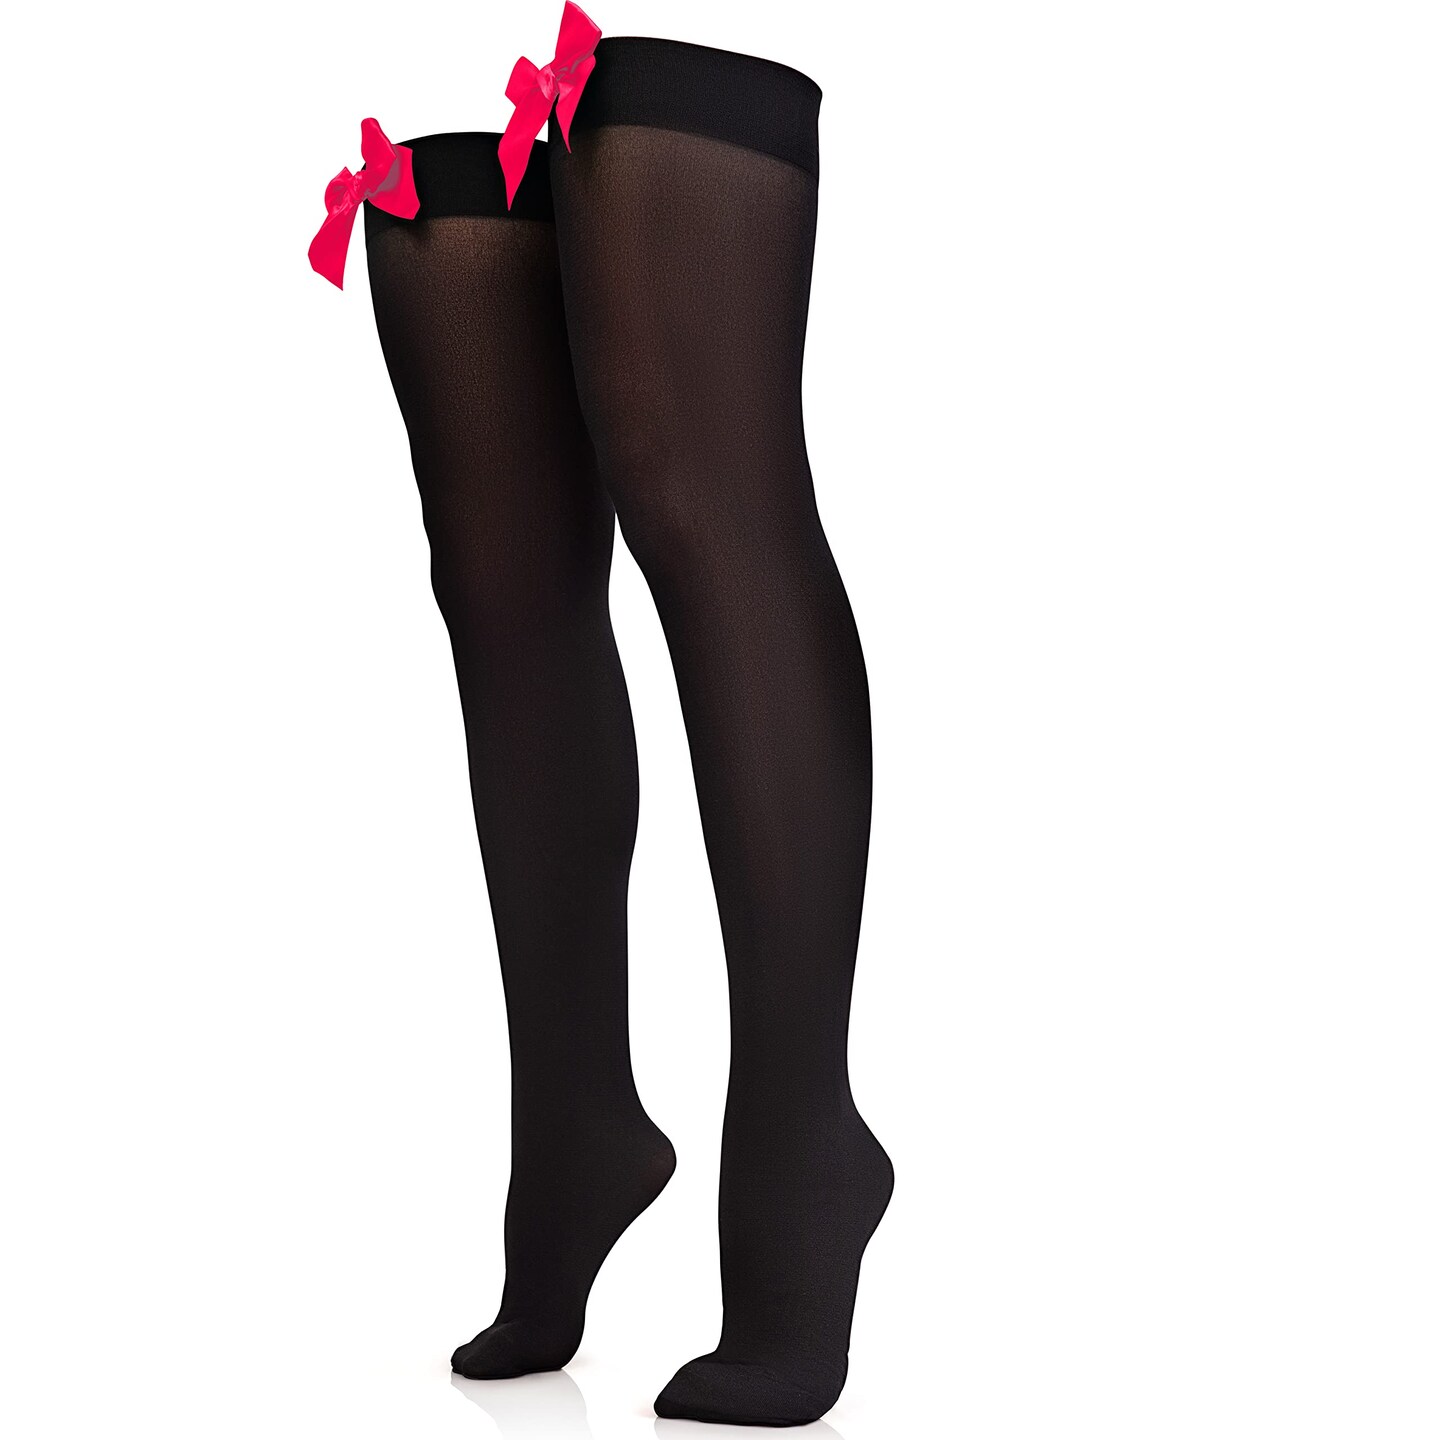 Bow Accent Thigh Highs - Black Over the Knee High Stockings with